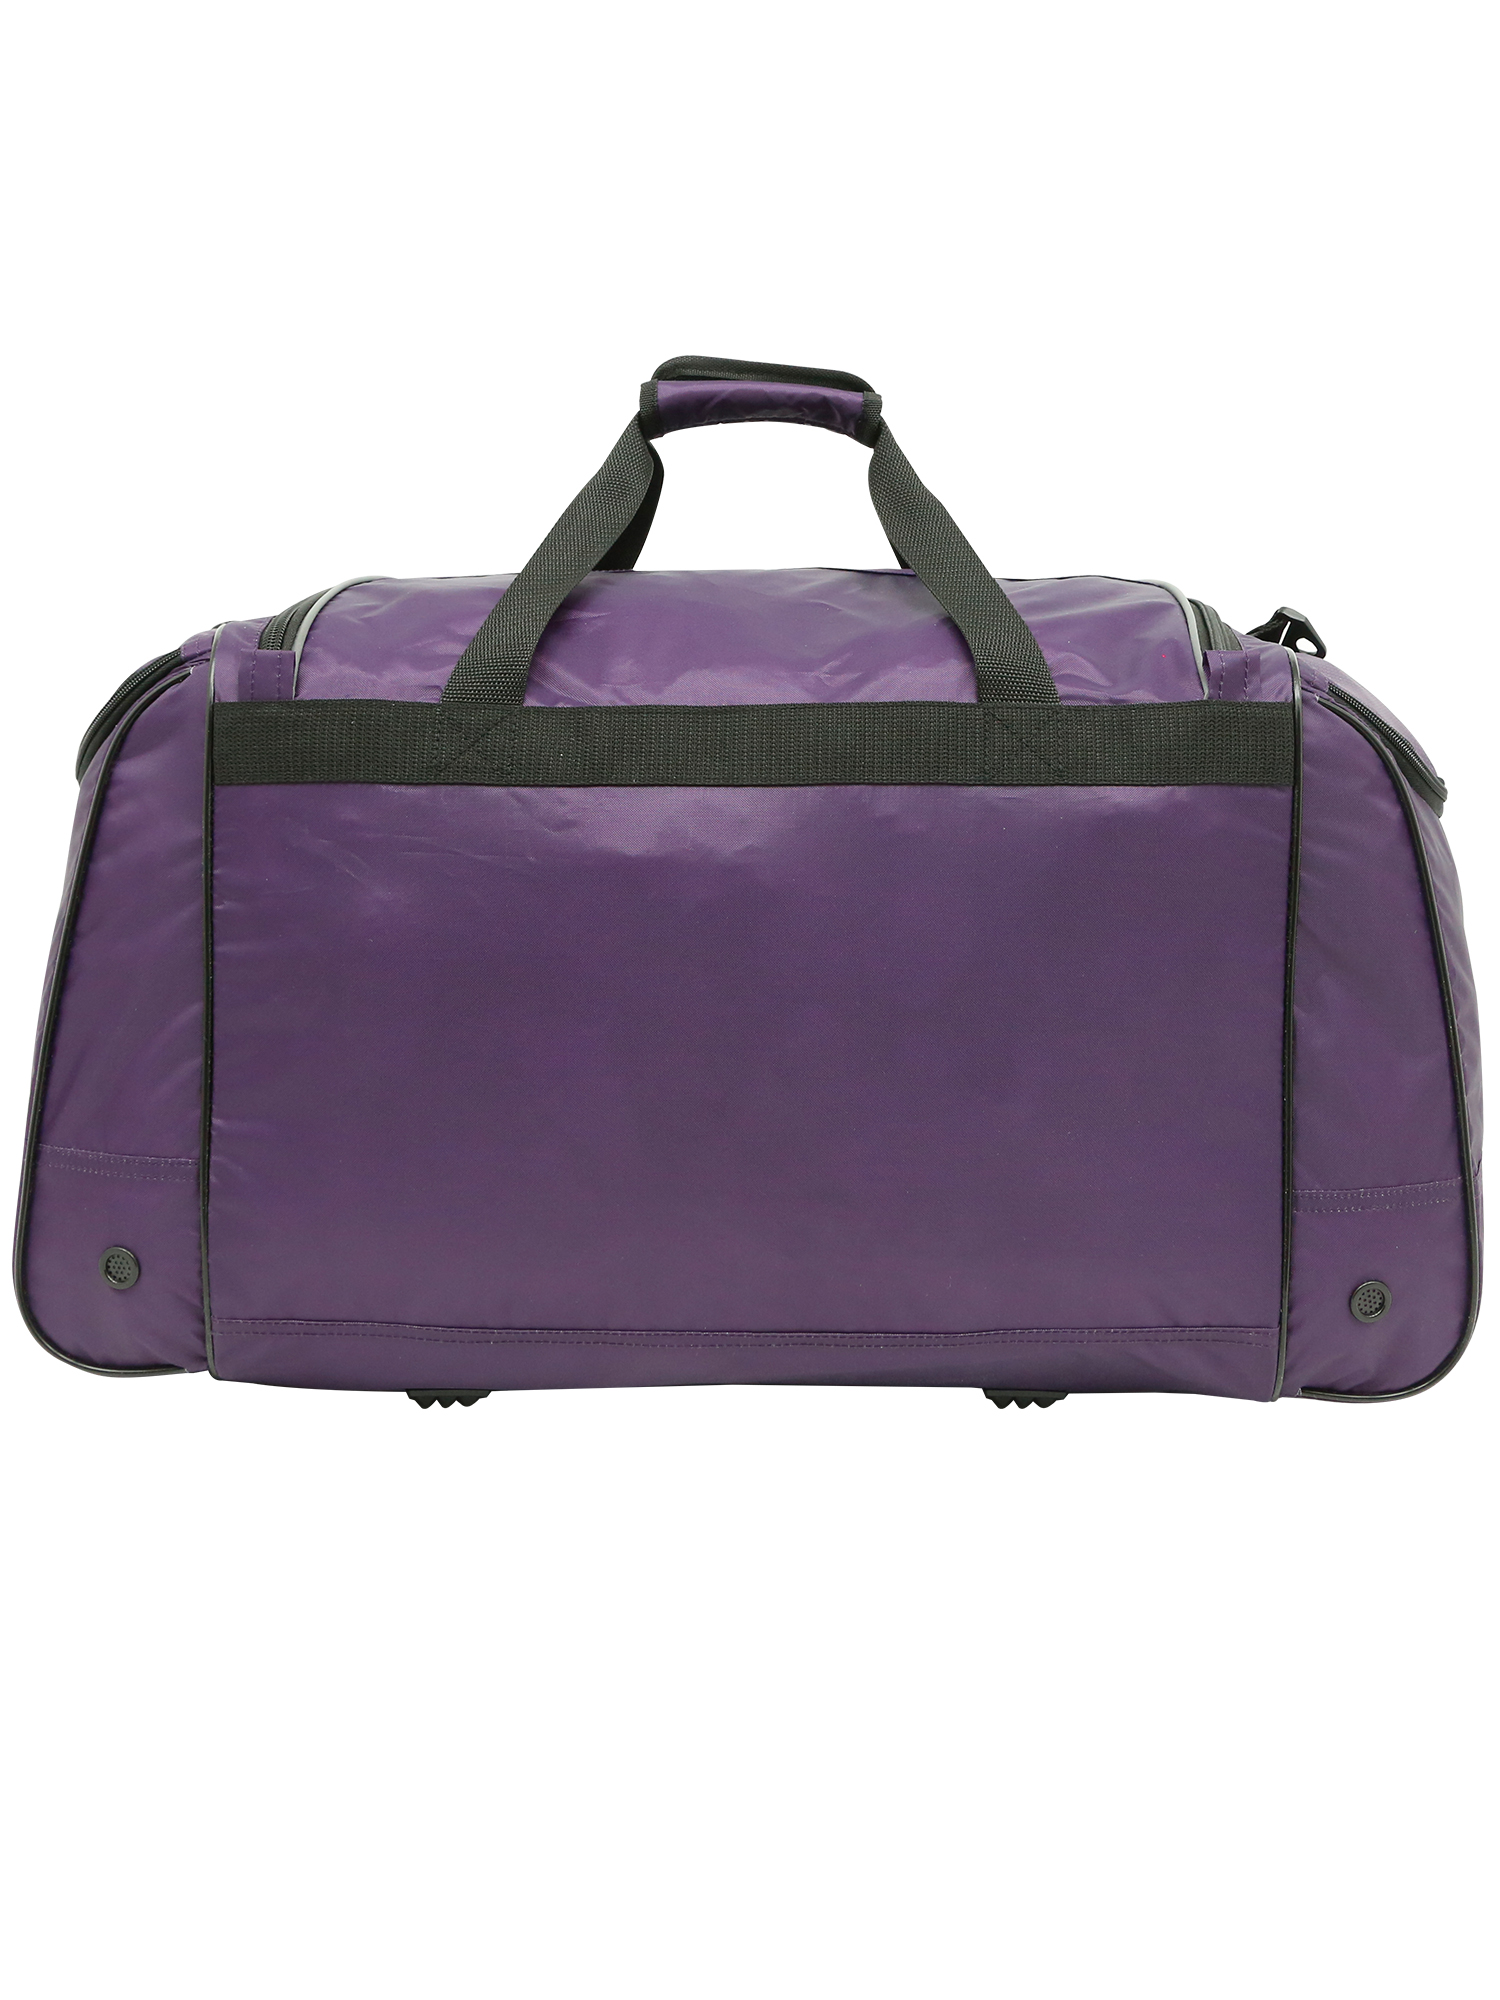 Protege 28" Polyester Sport Travel Duffel Bag, Purple - image 5 of 8